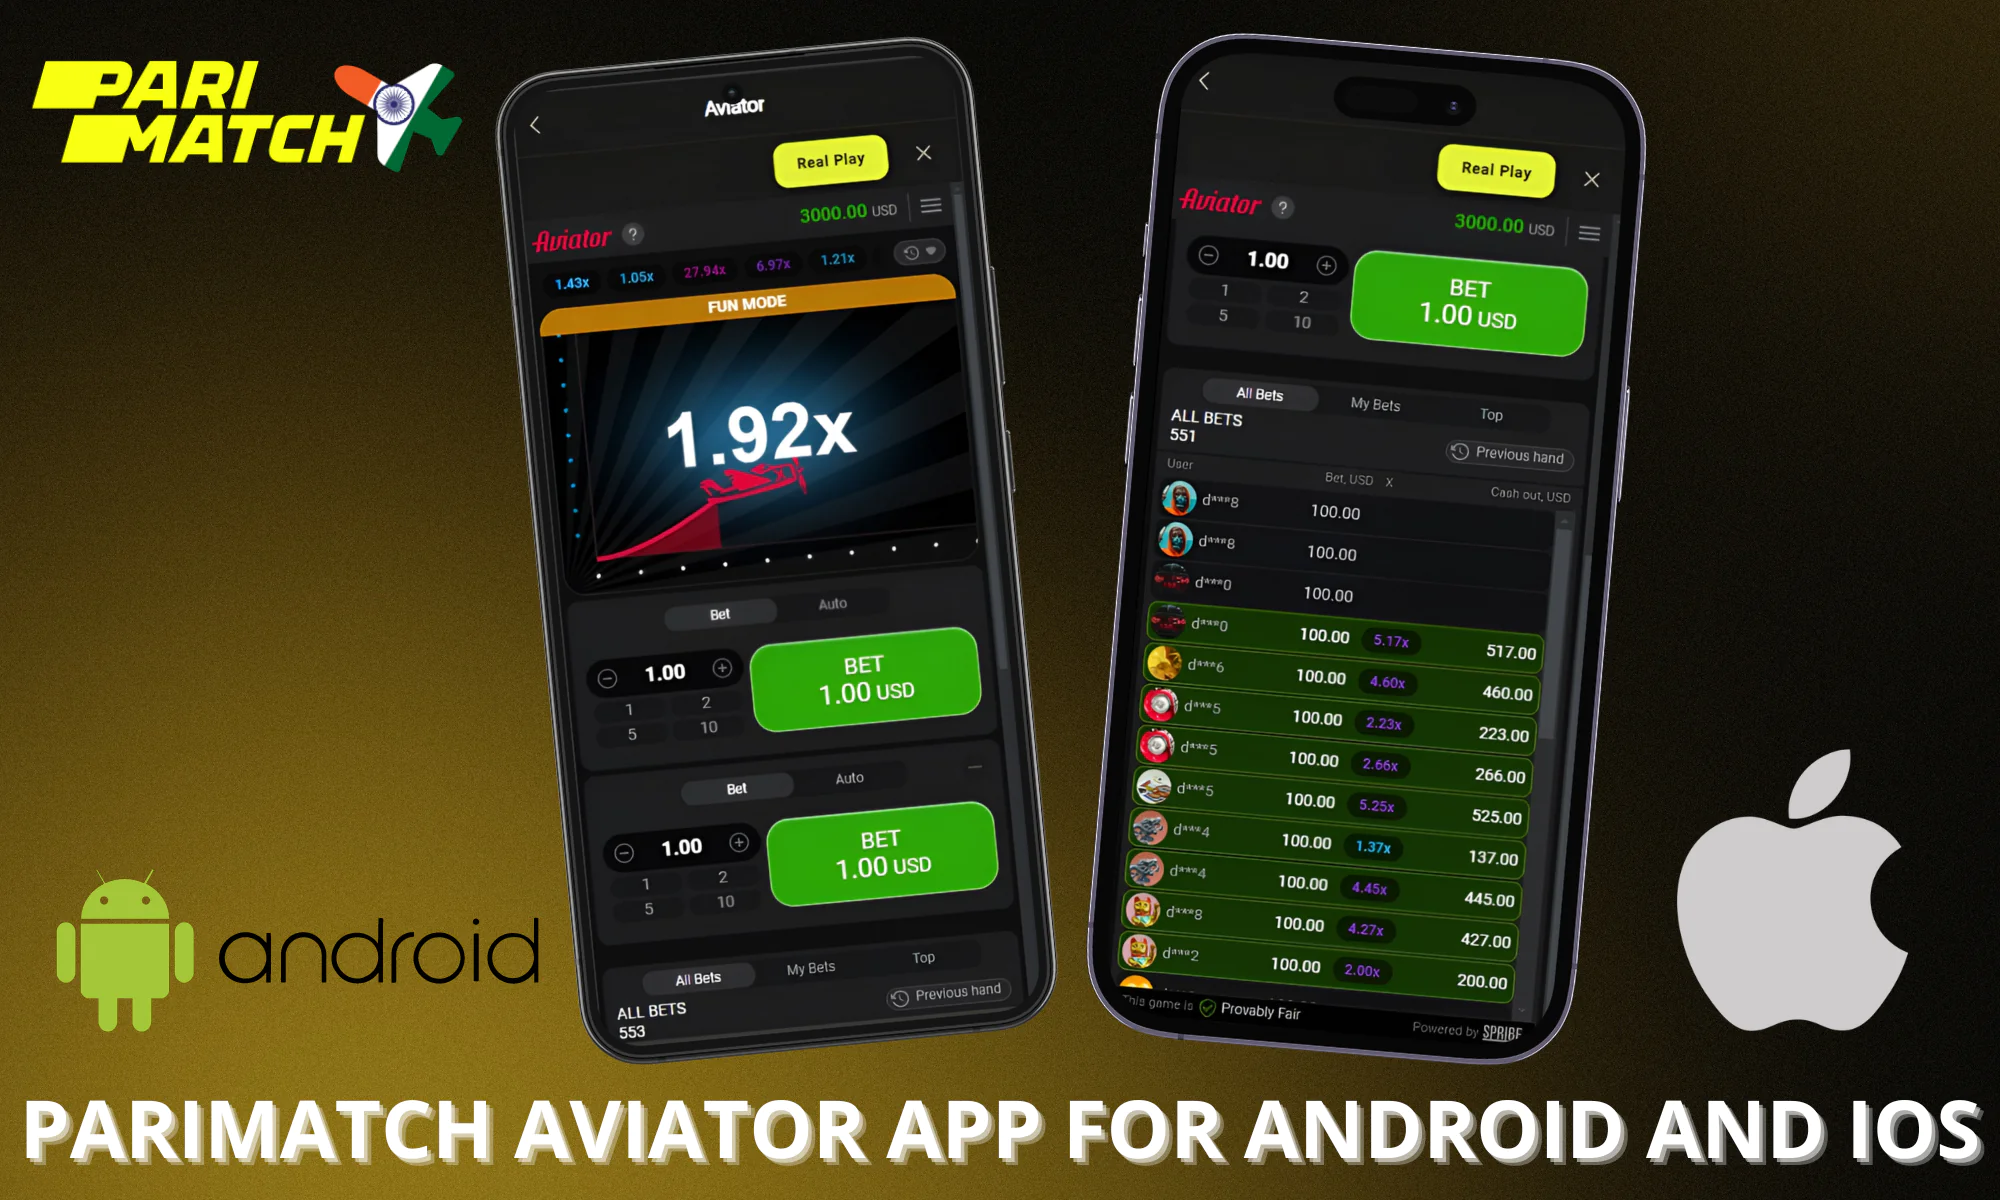 For those who like to play from their phones, Parimatch Aviator has a lodatok for Android and iOS